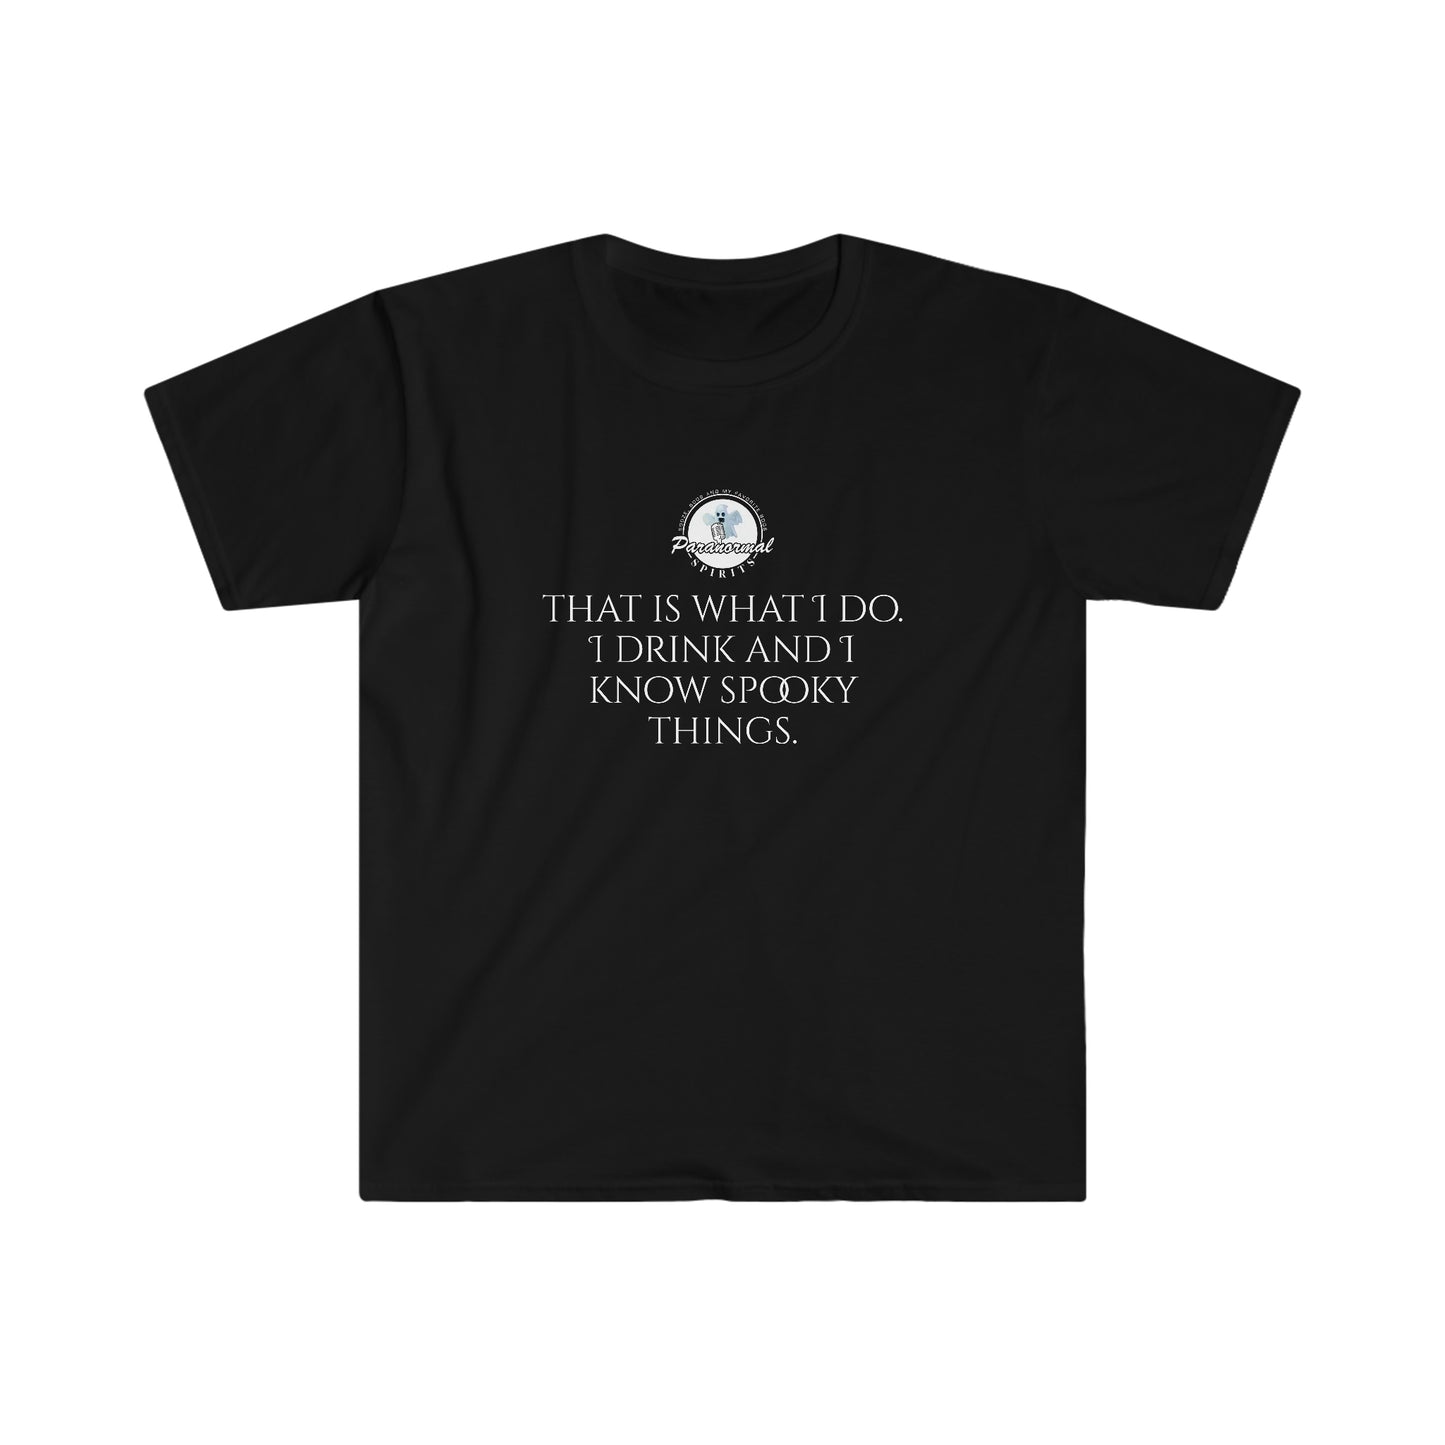 I Drink and I Know Spooky Things T-Shirt